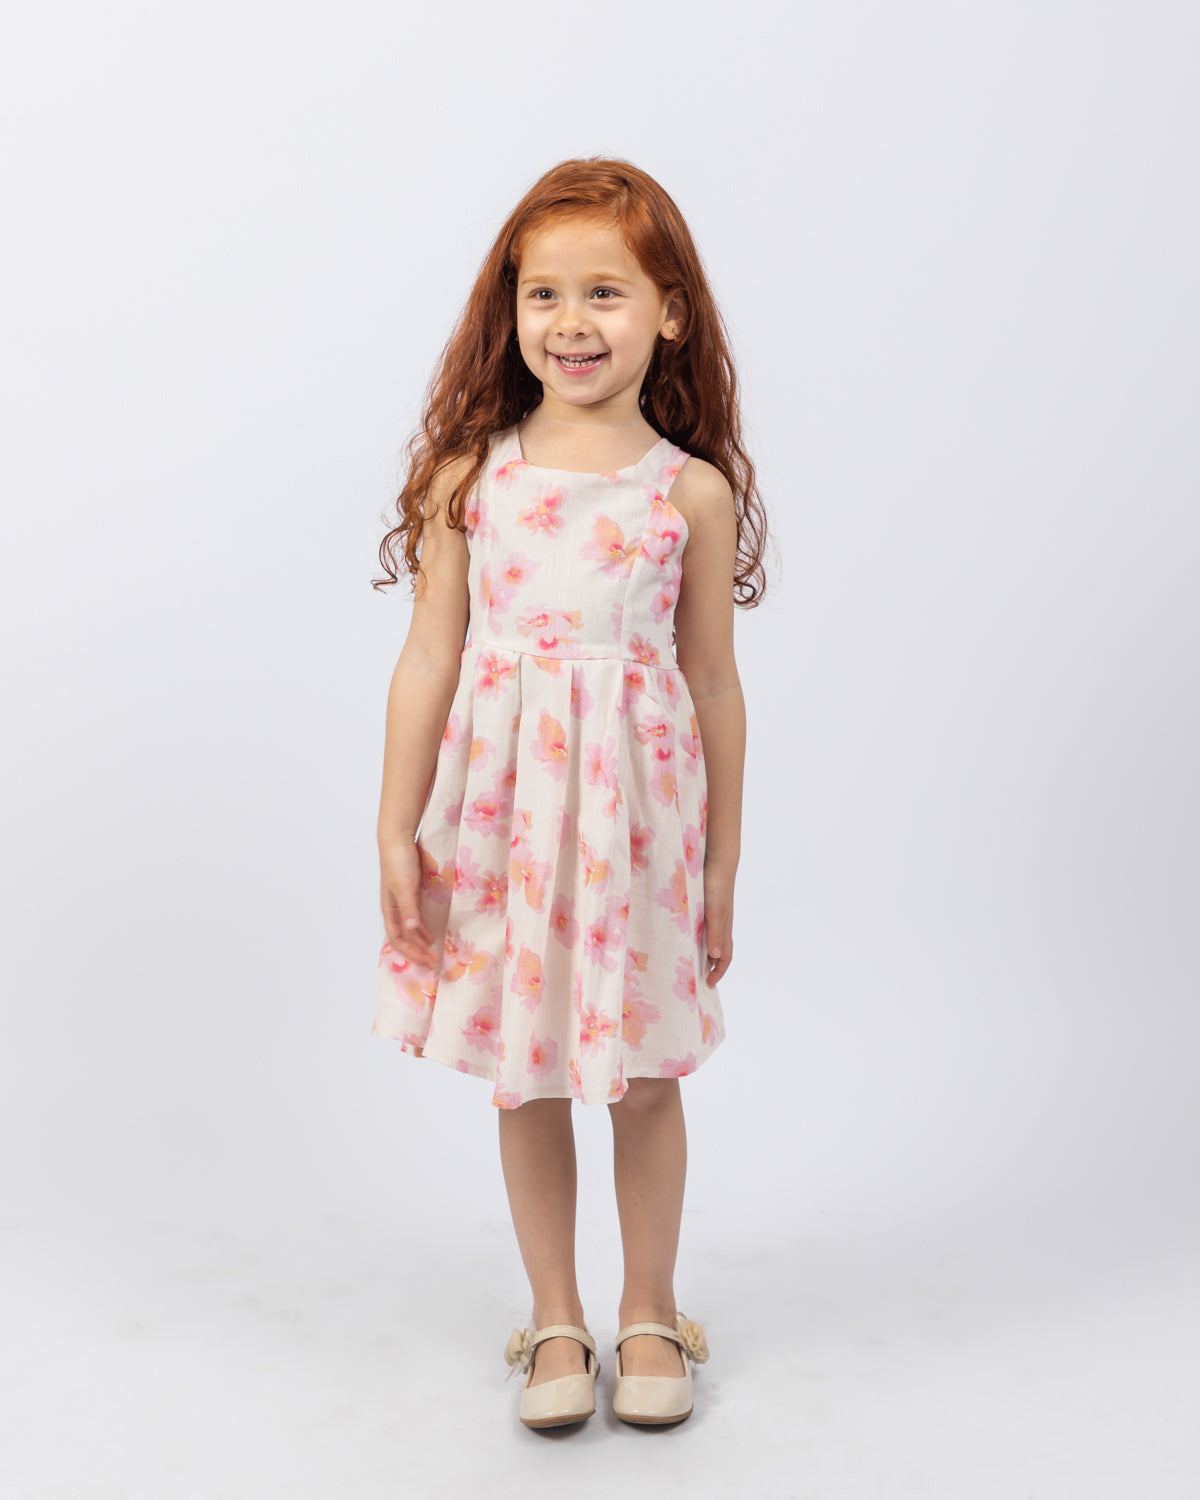 Floral Dress with Bow Knots For Girls - White